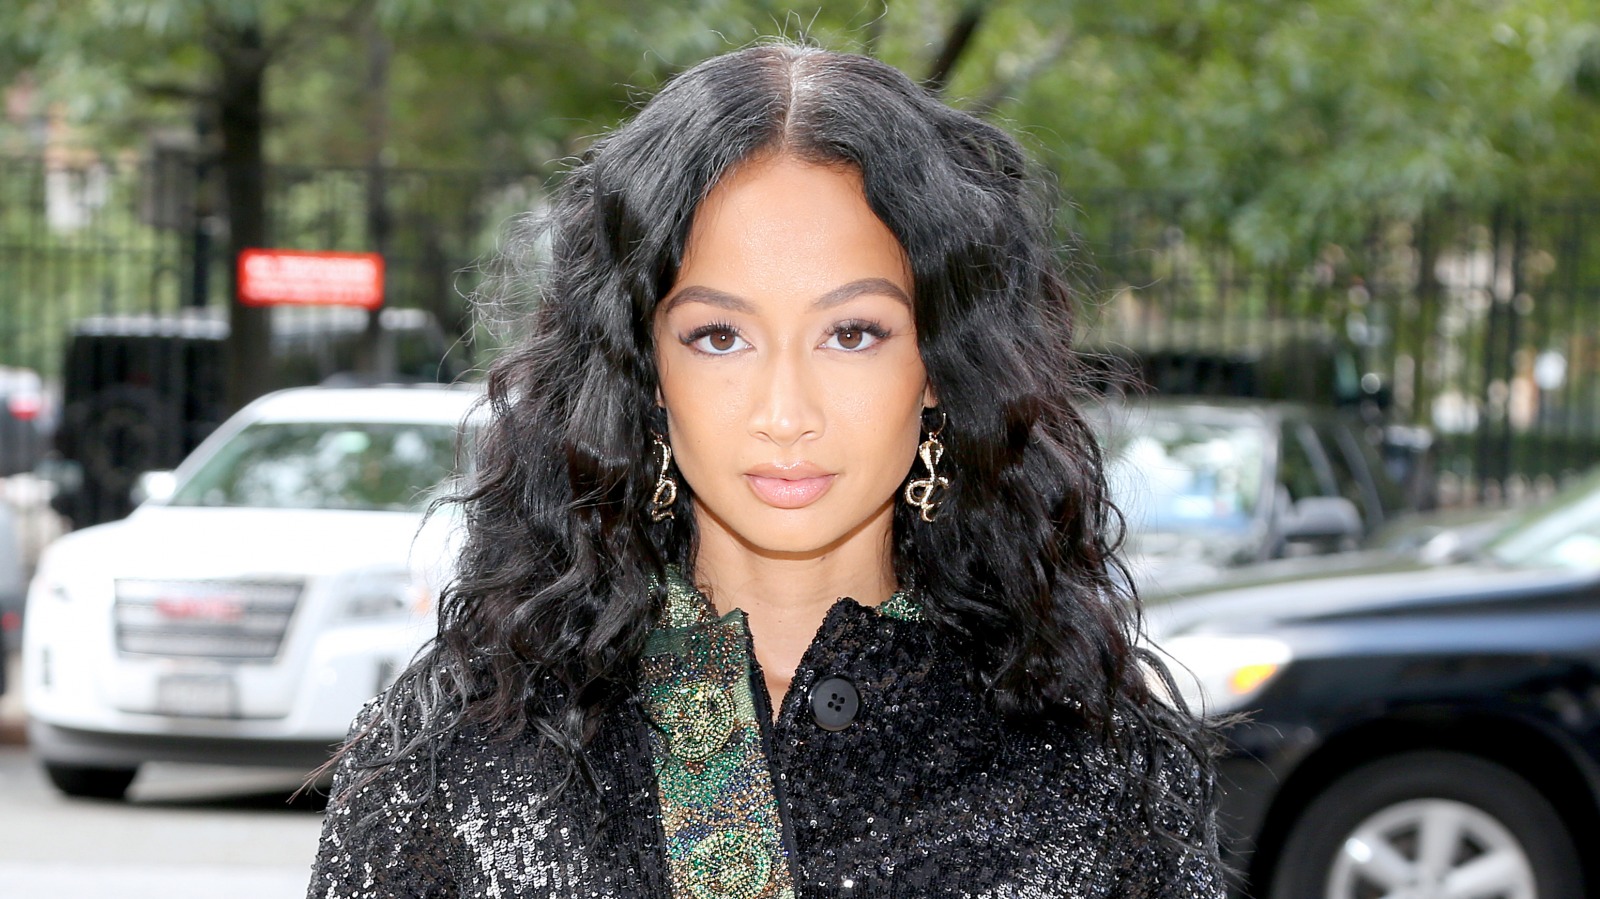 Who is Draya Michele mother?